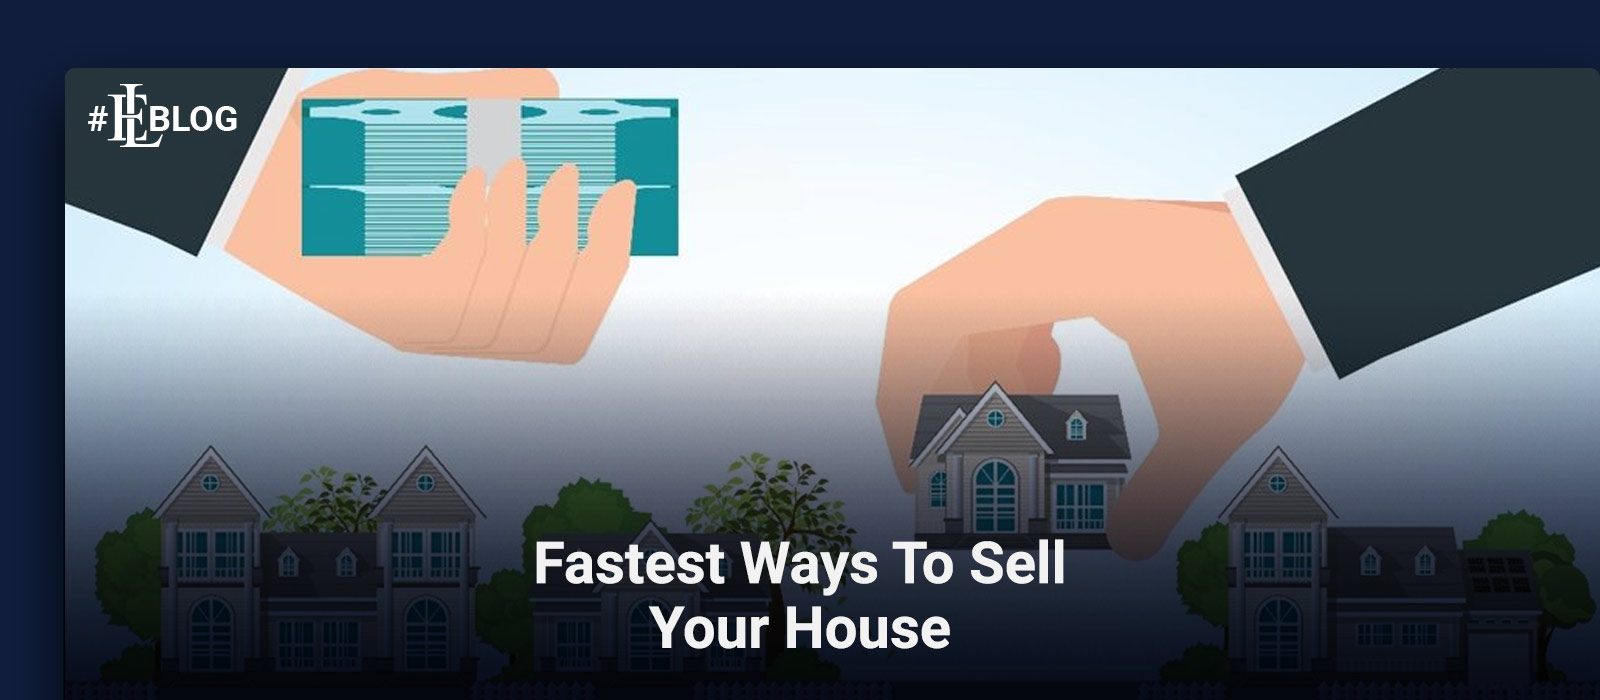 sell my house fast new jersey for cash